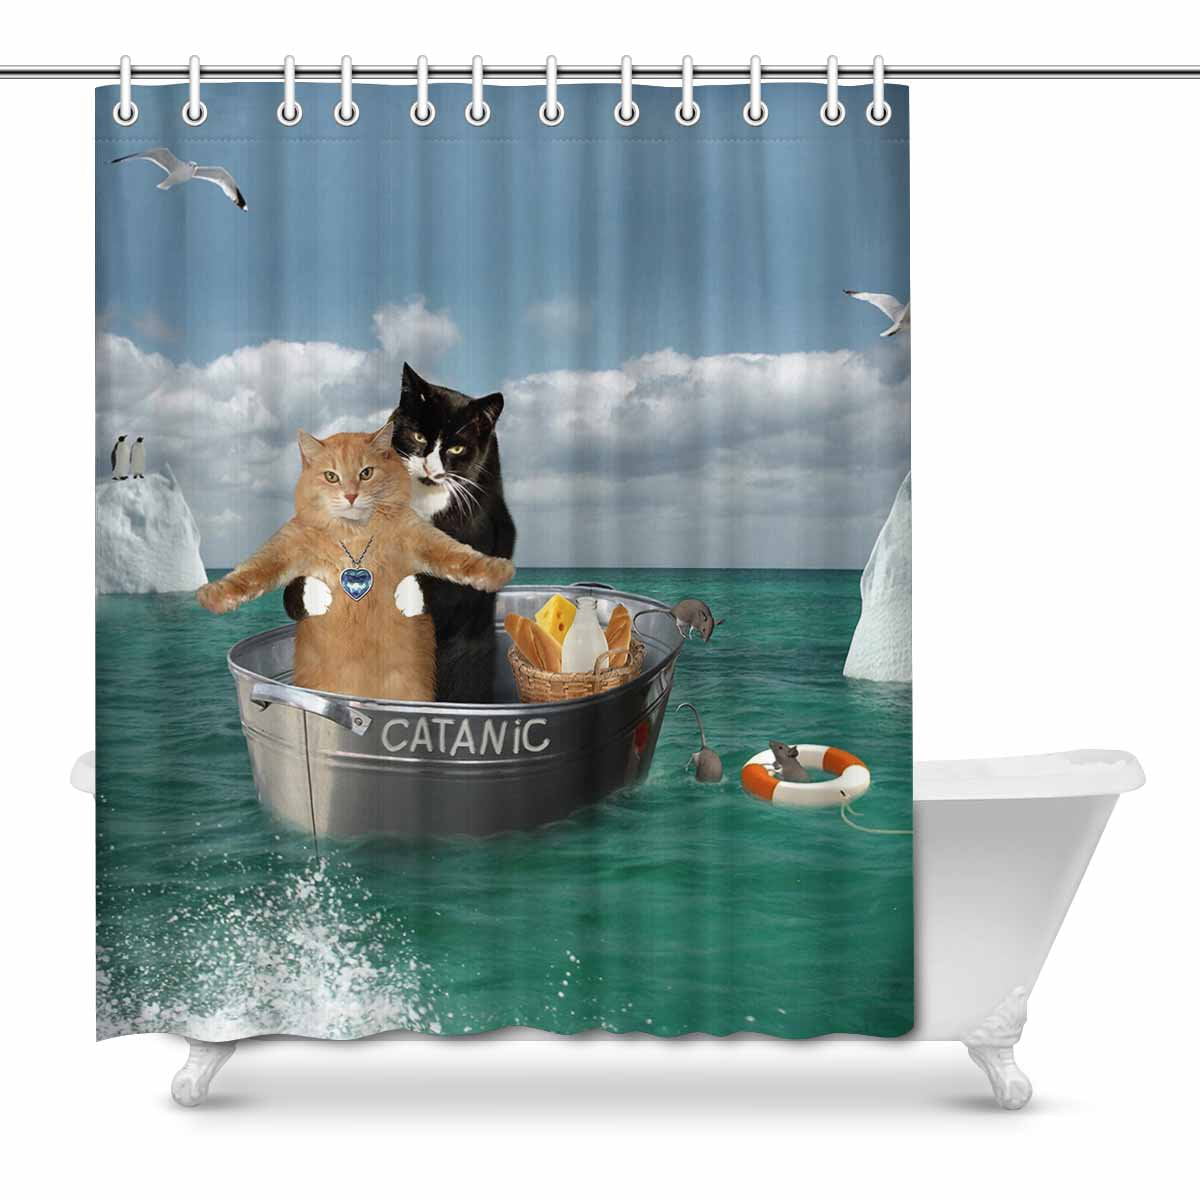 Details about   Cute Animals Funny Cats Shower Curtain Colored Eyes  For Bathroom Decor w/ Hooks 